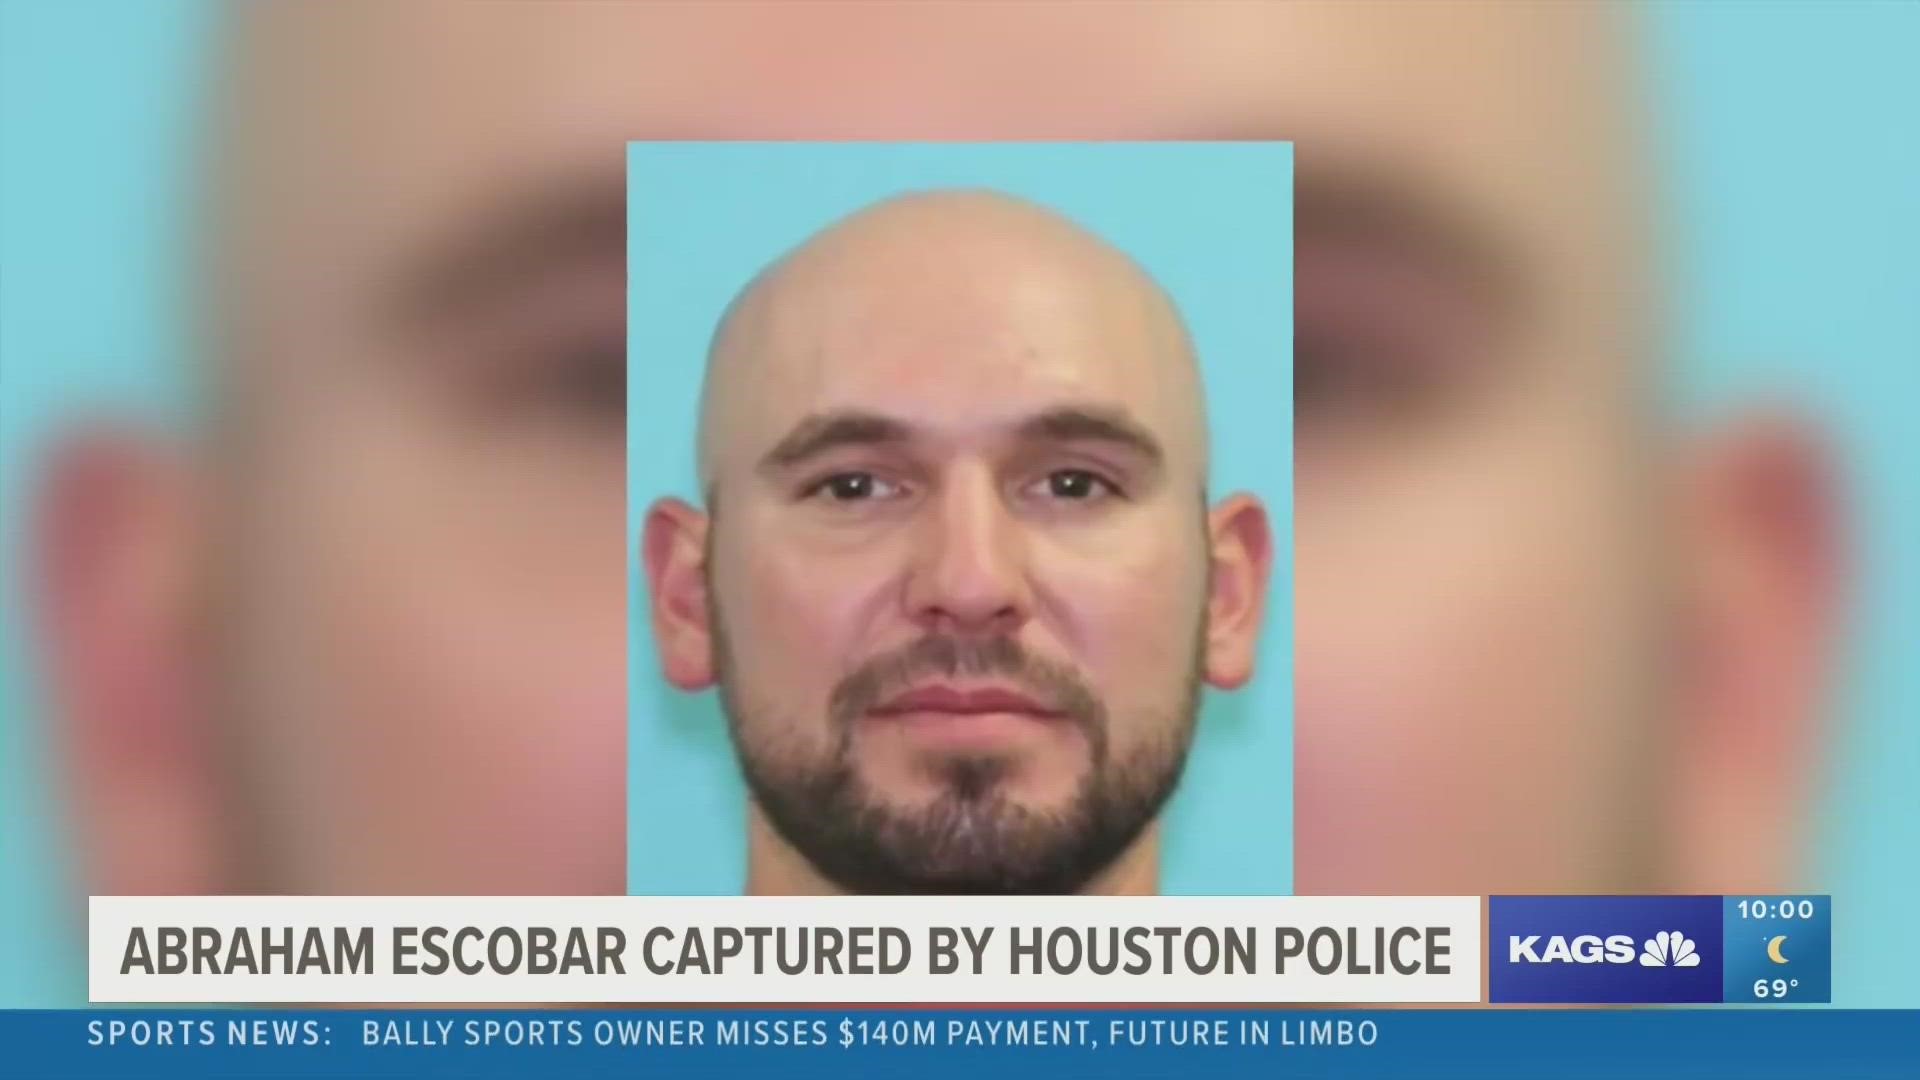 According to an update from College Station Police, Abraham Eli Escobar was captured at 7:30 p.m. by a number of Houston crime agencies in Northwest Houston.